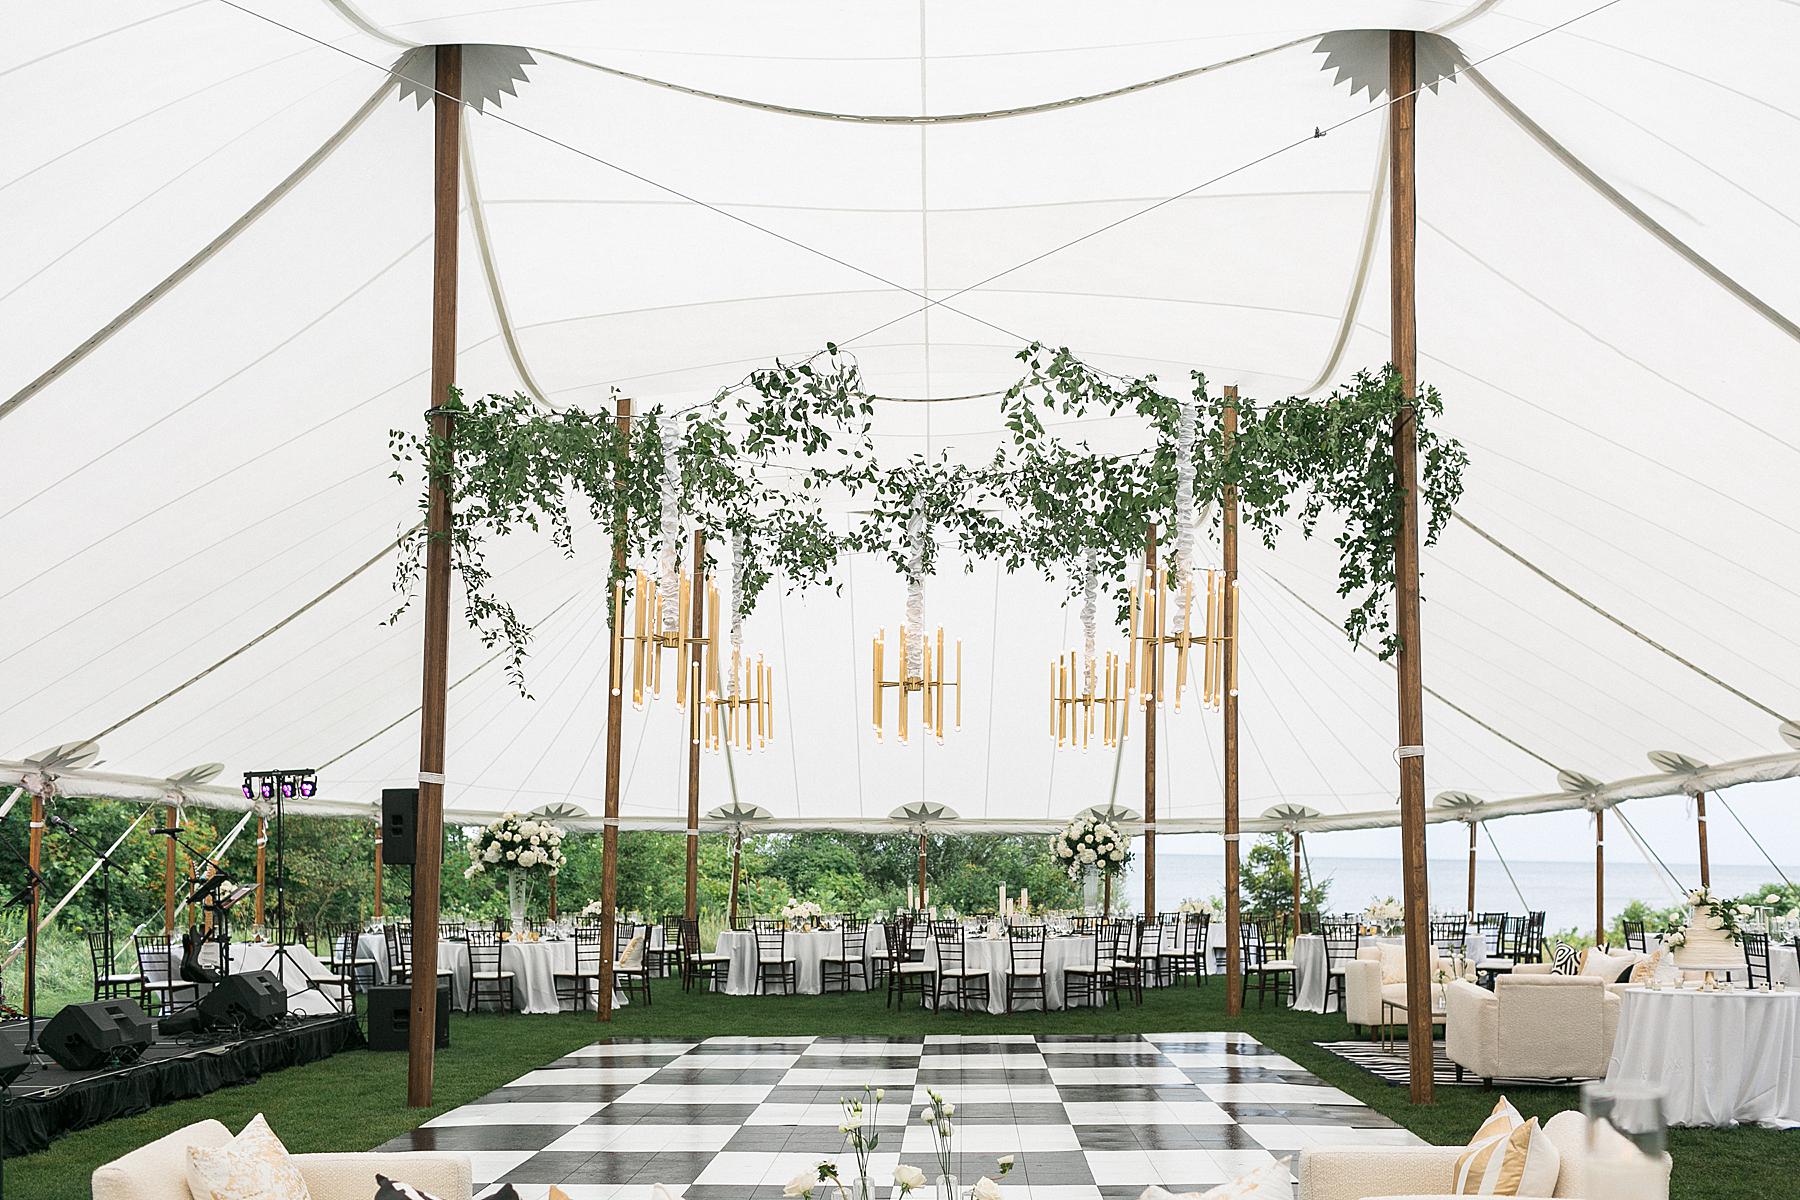 checkerboard dance floor and hanging chandelier under sailcloth tent wedding reception at horseshoe bay beach club in door county